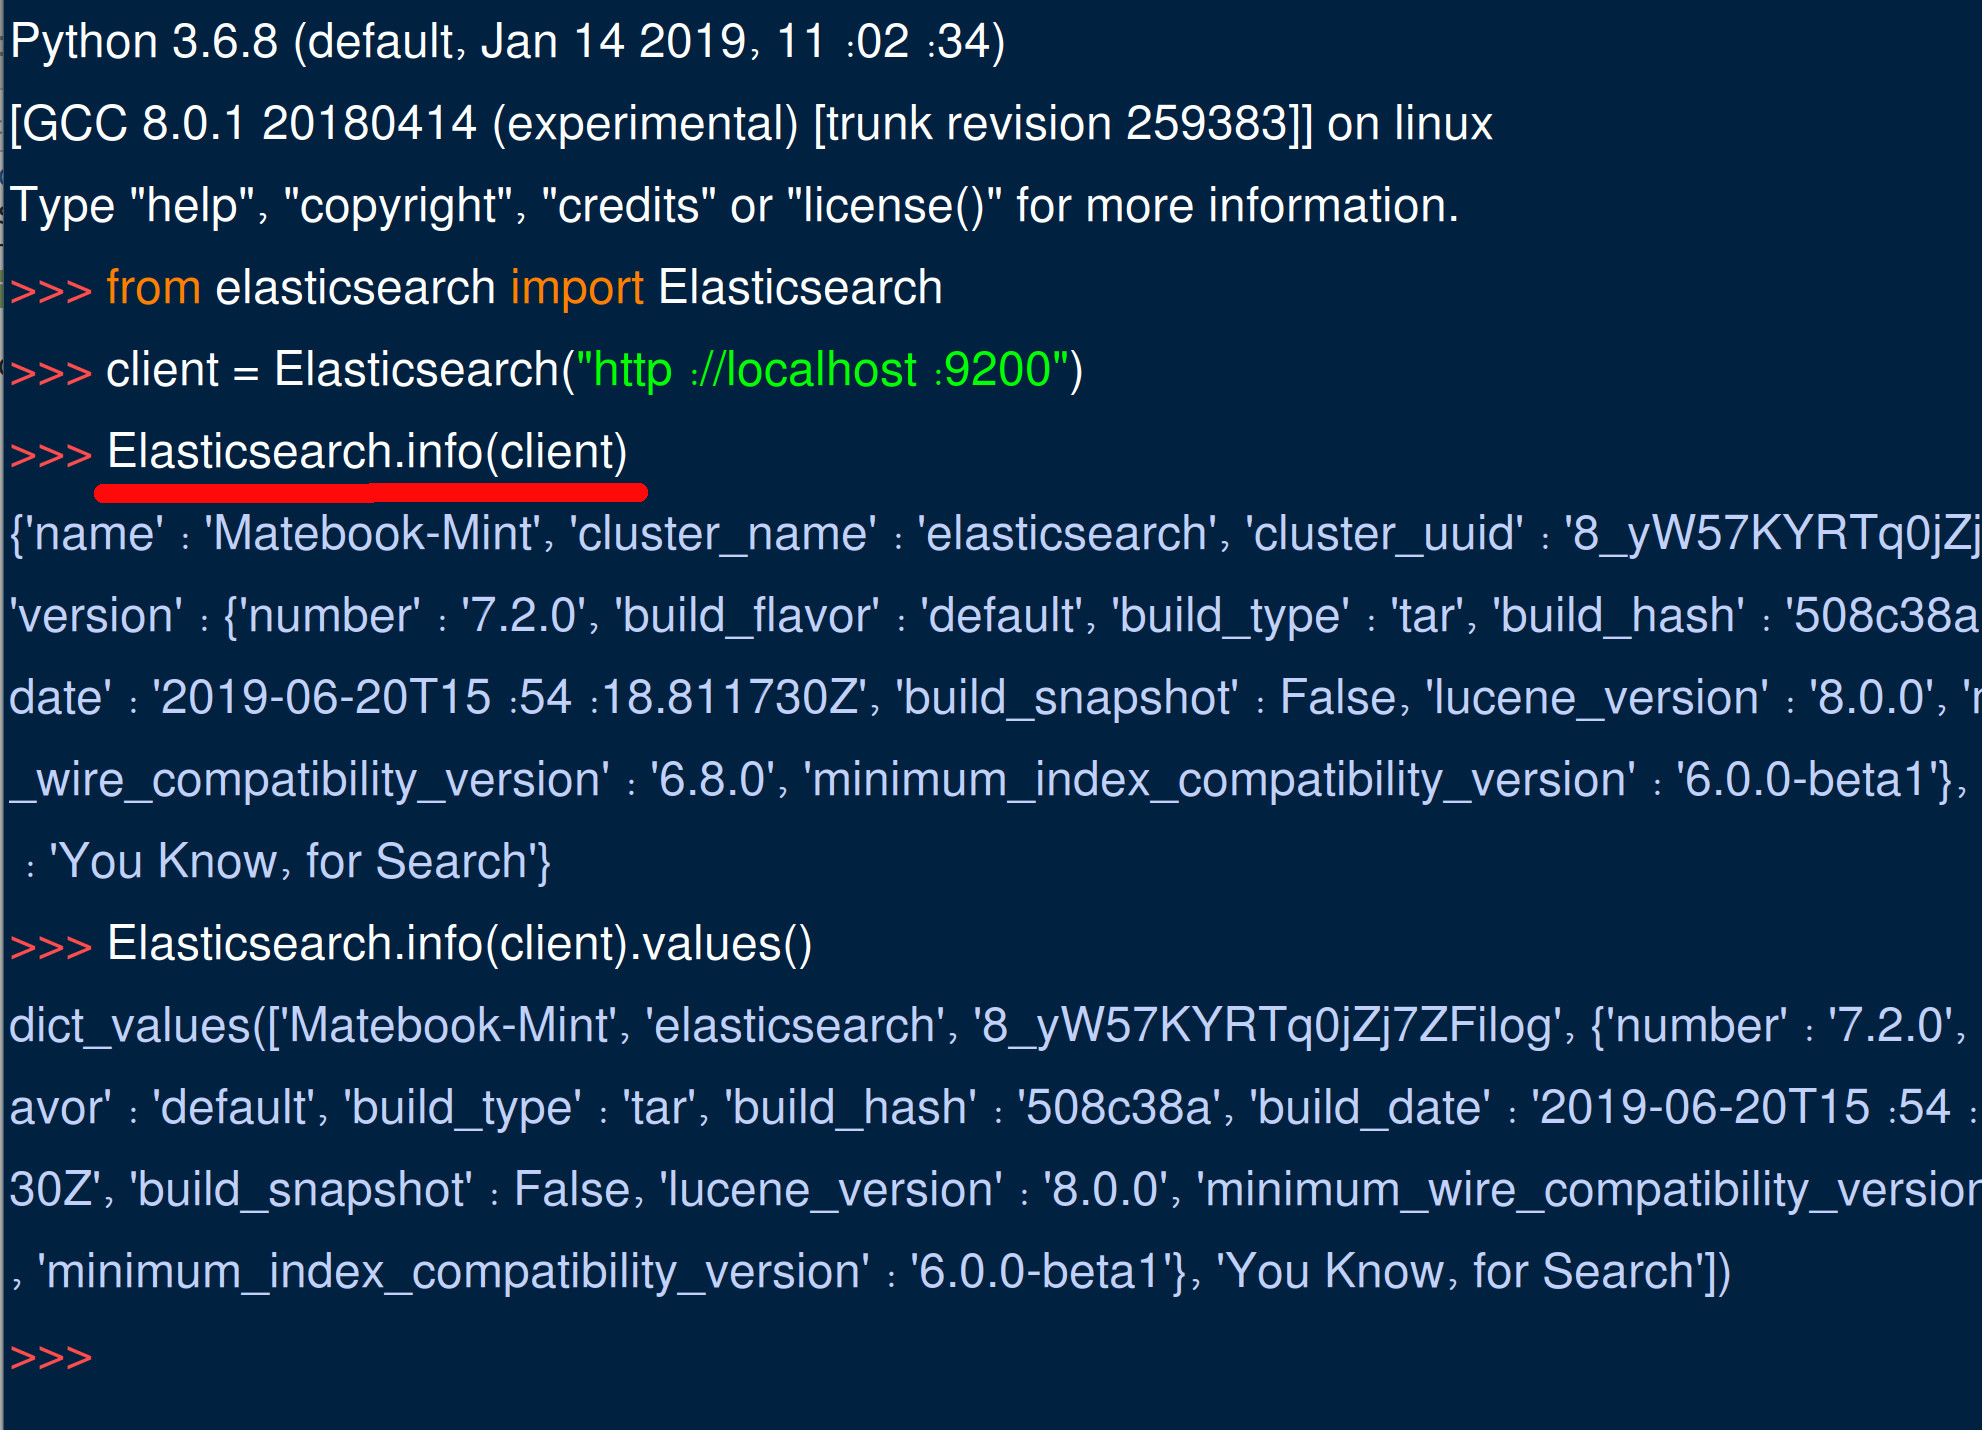 Screenshot an Elasticsearch cluster's information in Python IDLE